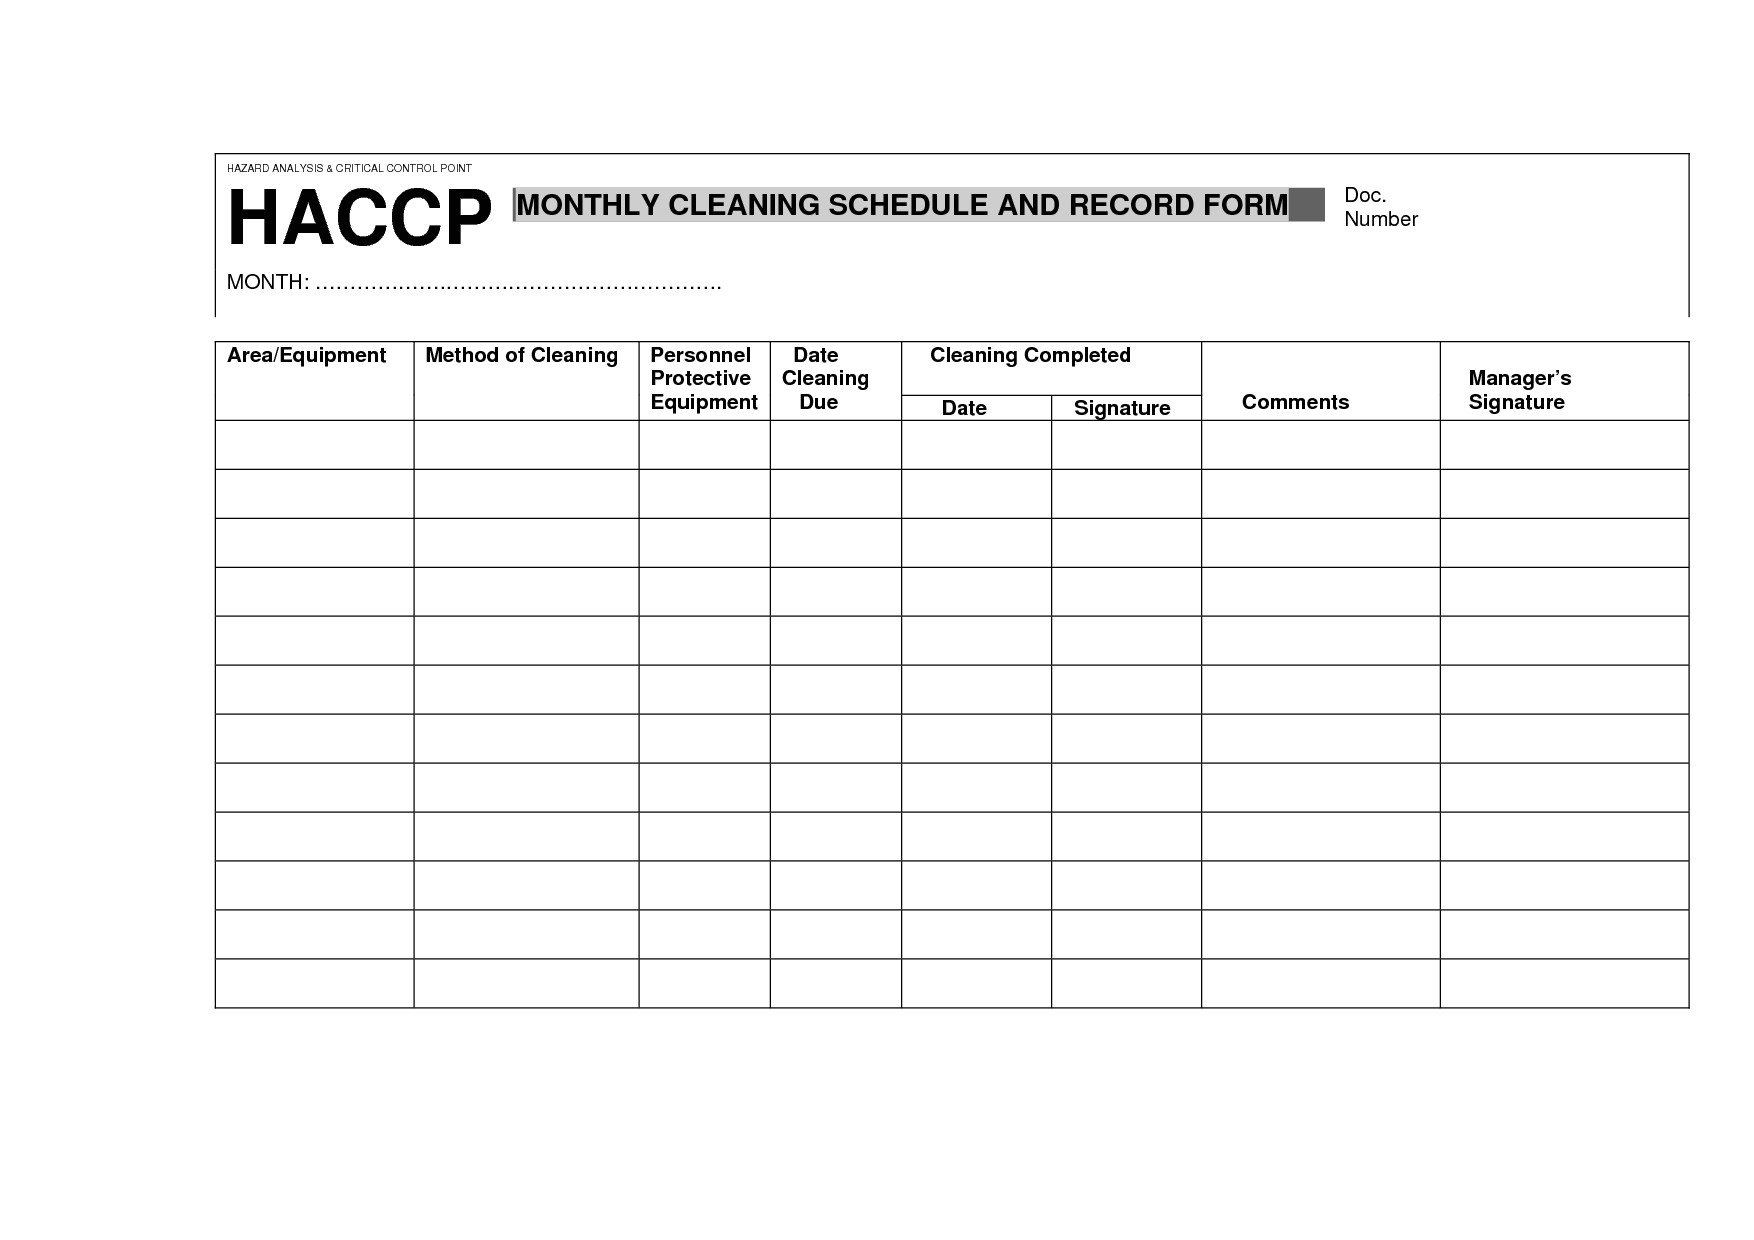 Haccp Checklist Template Haccp Cleaning Schedule And Record Form Methi Of Haccp Checklist Template 